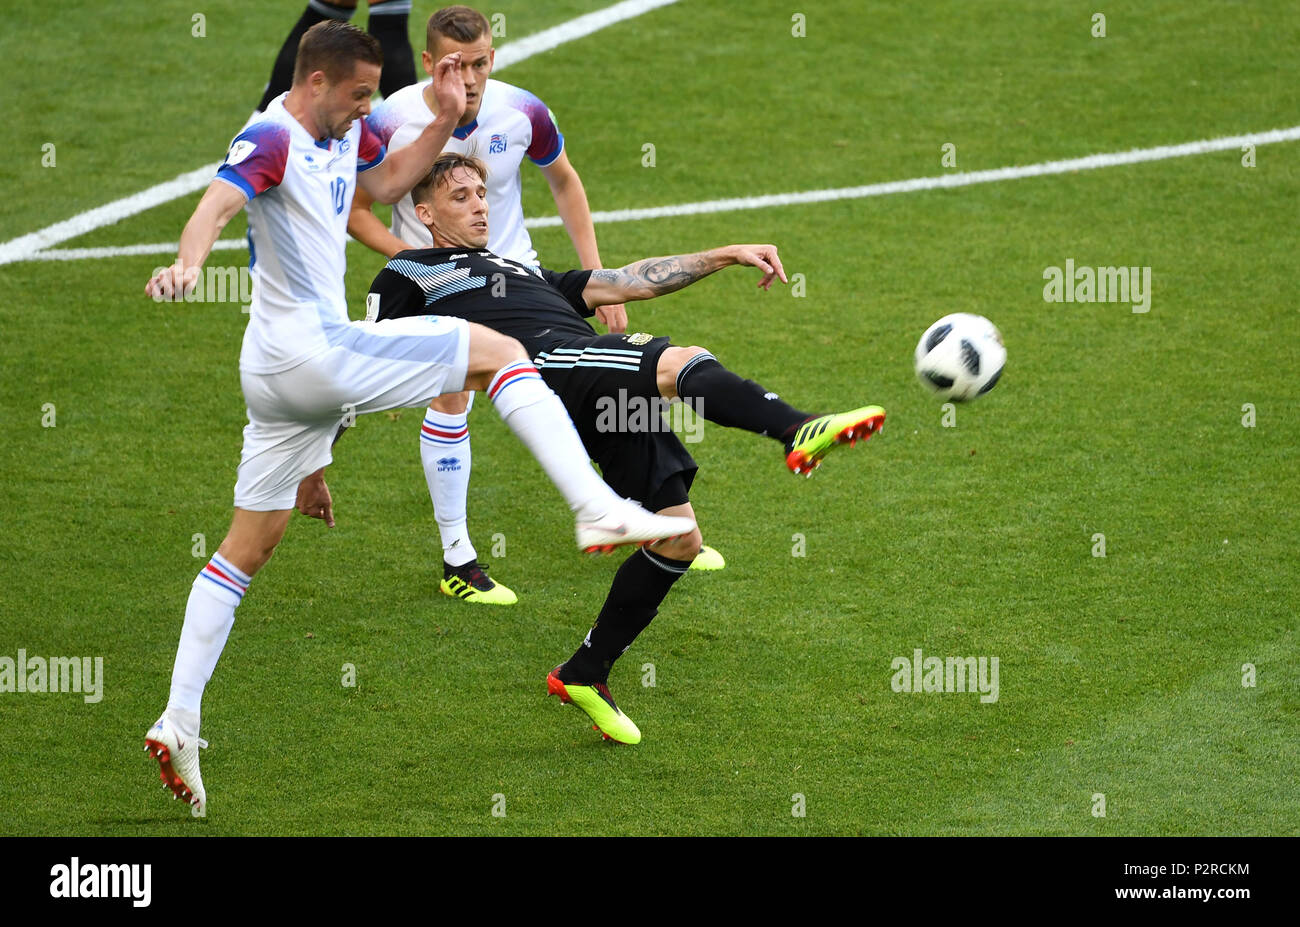 Moscow, Russia. 16th June, 2018. Lucas Biglia (C) of Argentina competes during a group D match between Argentina and Iceland at the 2018 FIFA World Cup in Moscow, Russia, June 16, 2018. Credit: Wang Yuguo/Xinhua/Alamy Live News Stock Photo